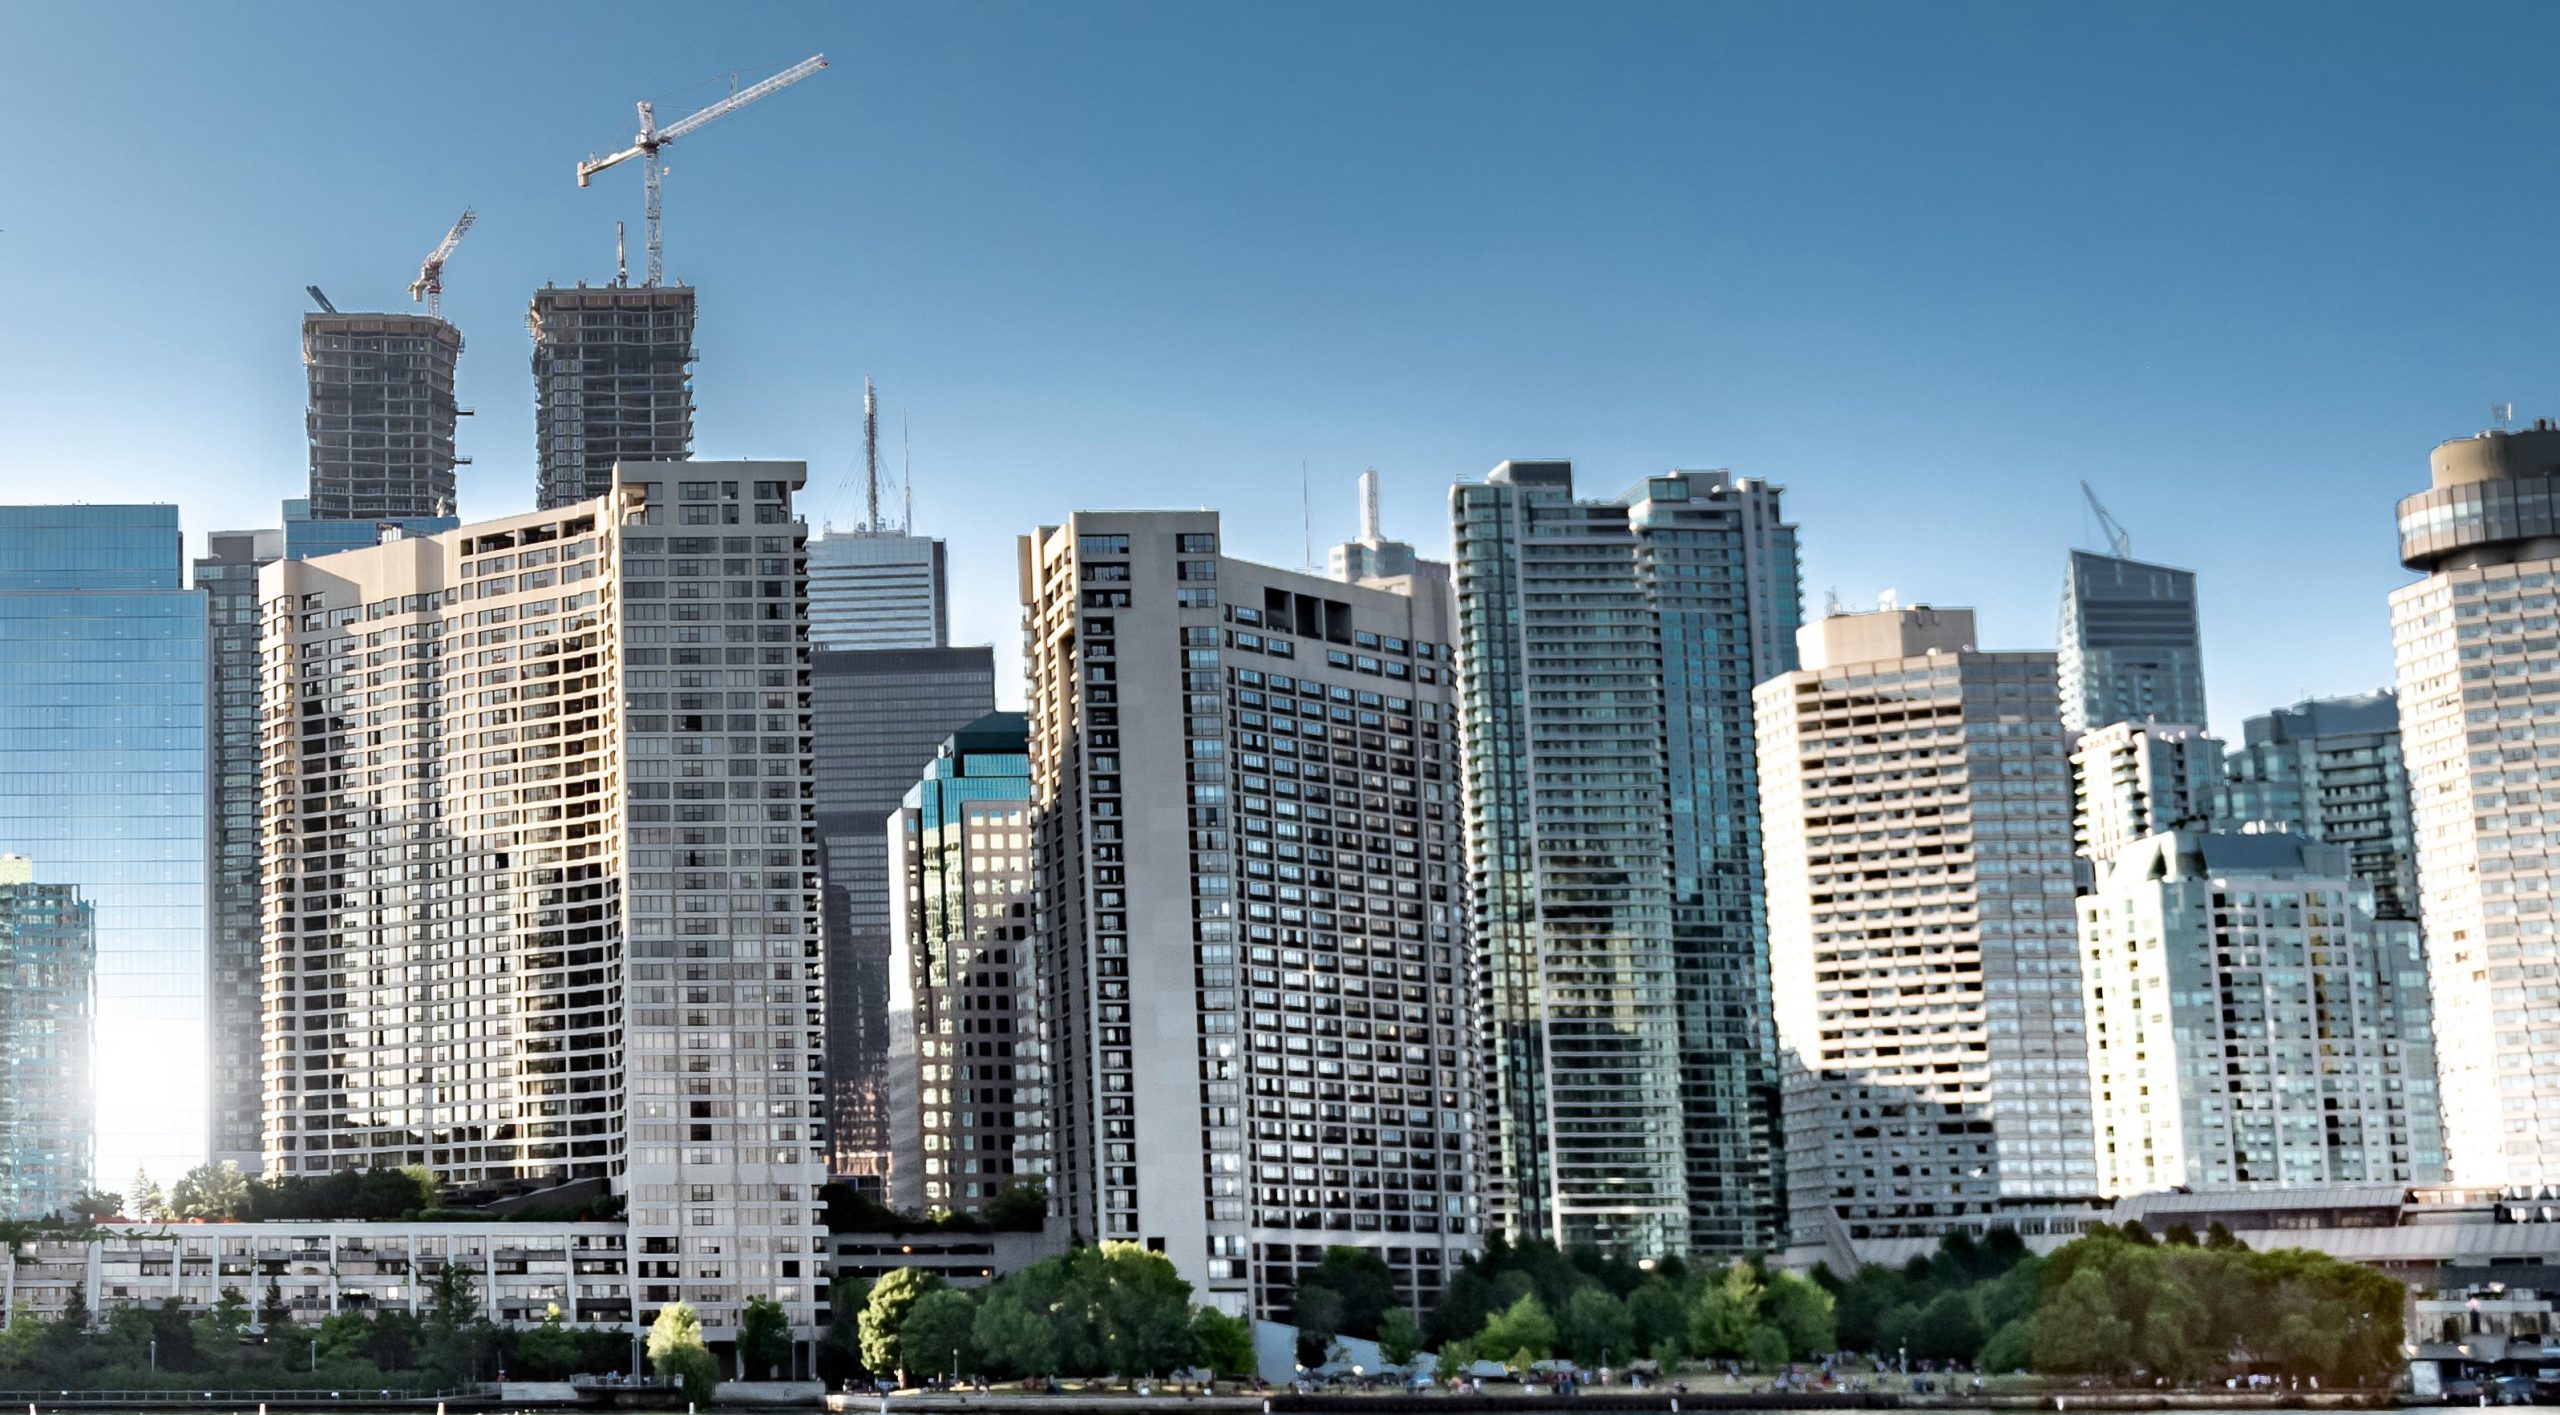 CANADIAN REAL ESTATE IS WORSE THAN OFFICIAL DATA SHOWS, BMO REVISES FORECAST LOWER